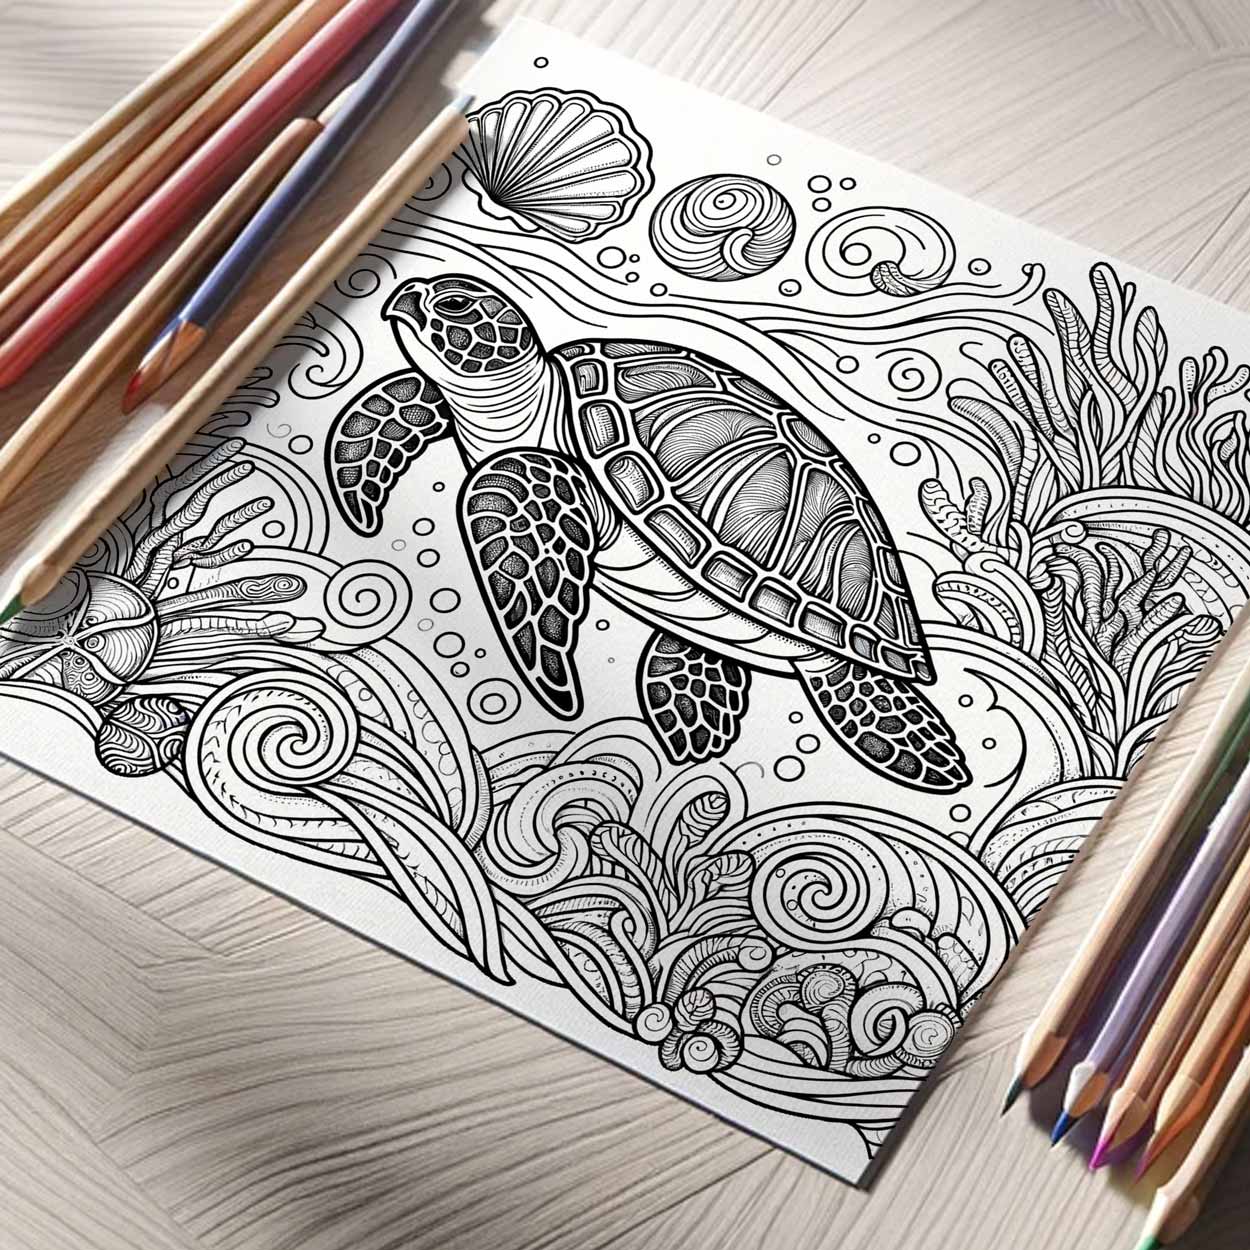 Sea turtle adult coloring pages. Order printed or printable files. Click to shop.